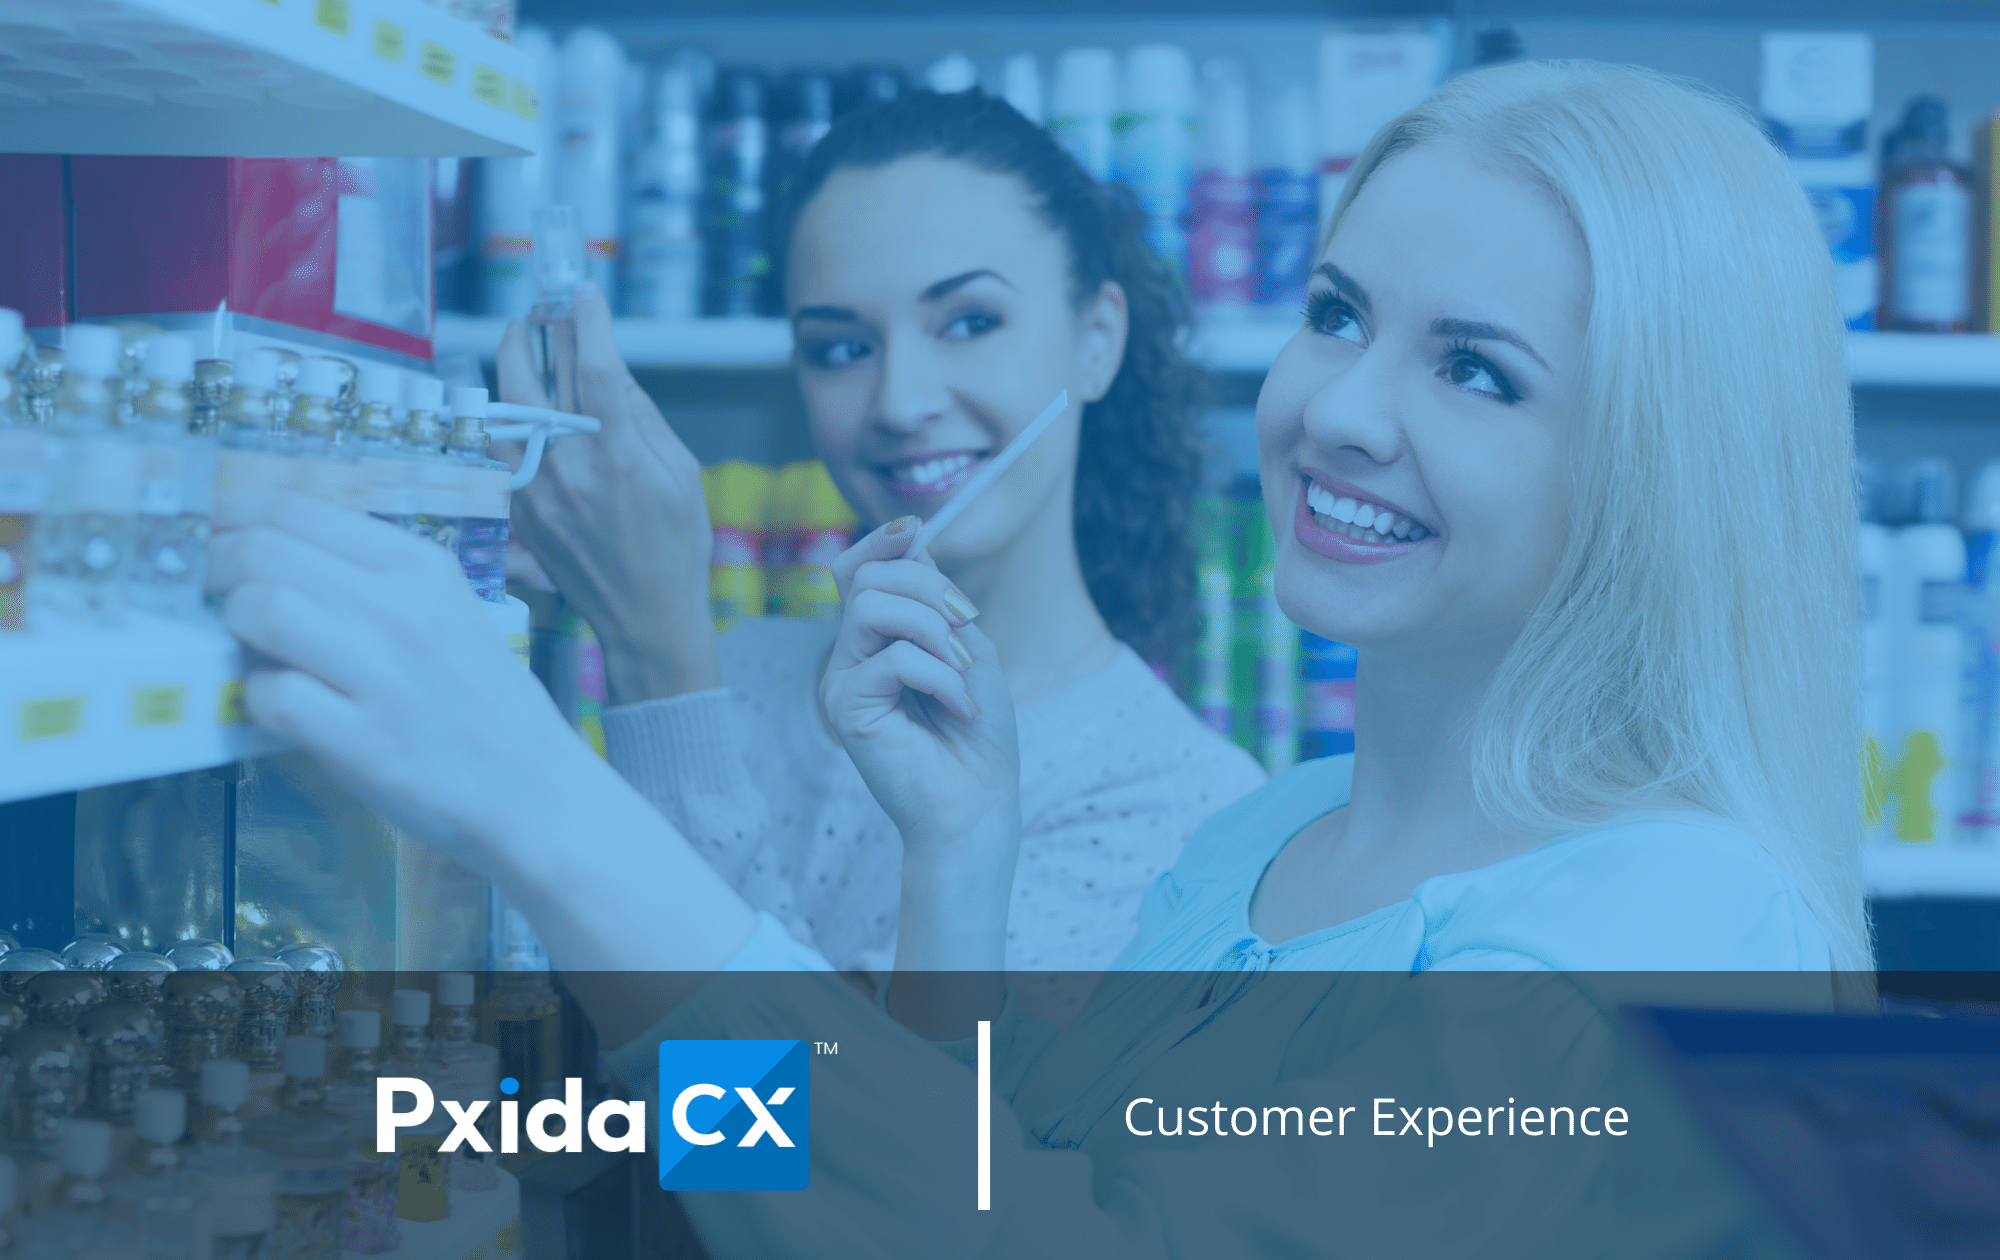 Customer Experience and Marketing: 5 Best Practices You Need to Know